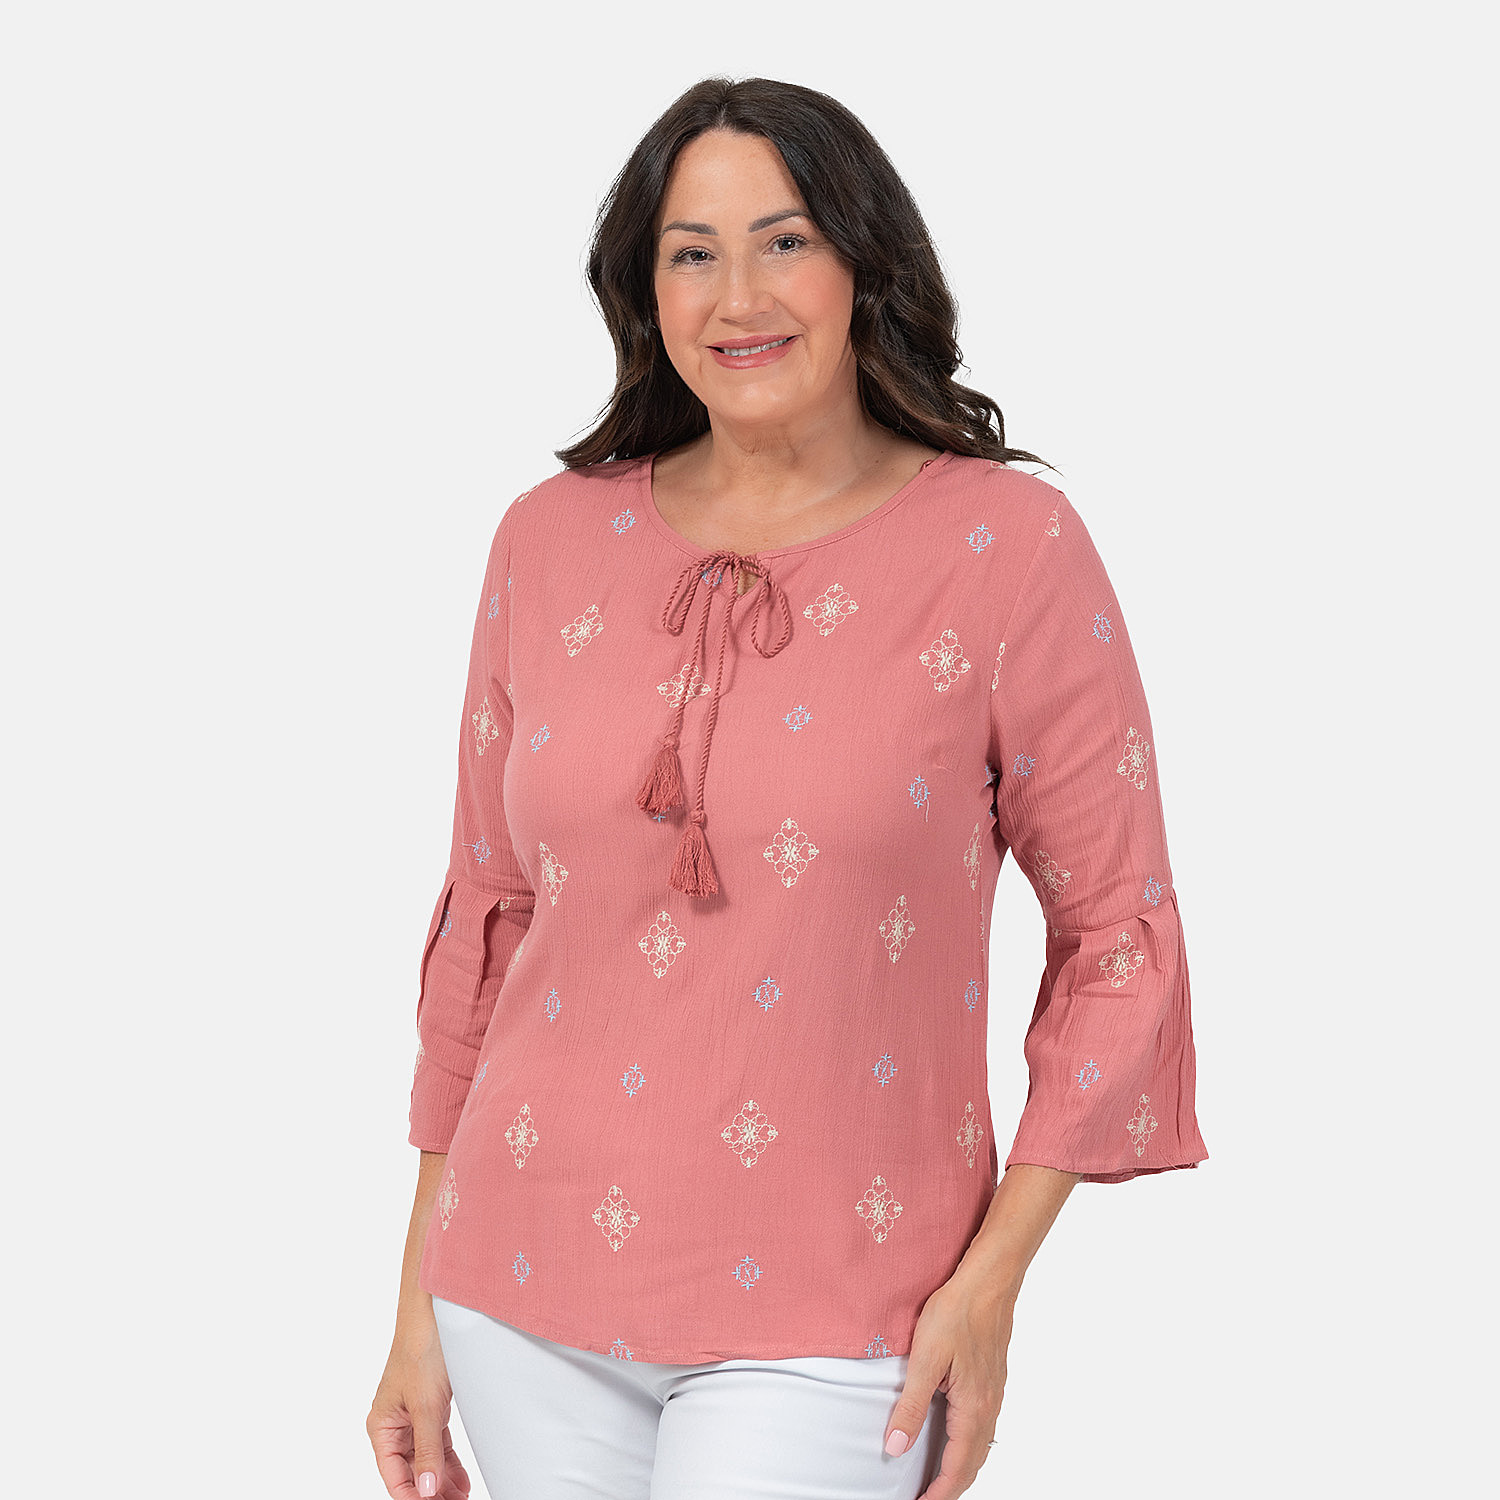 Mudflower-100-Viscose-Crinkle-Embroded-Blouse-Size-S-Dusty-Pink